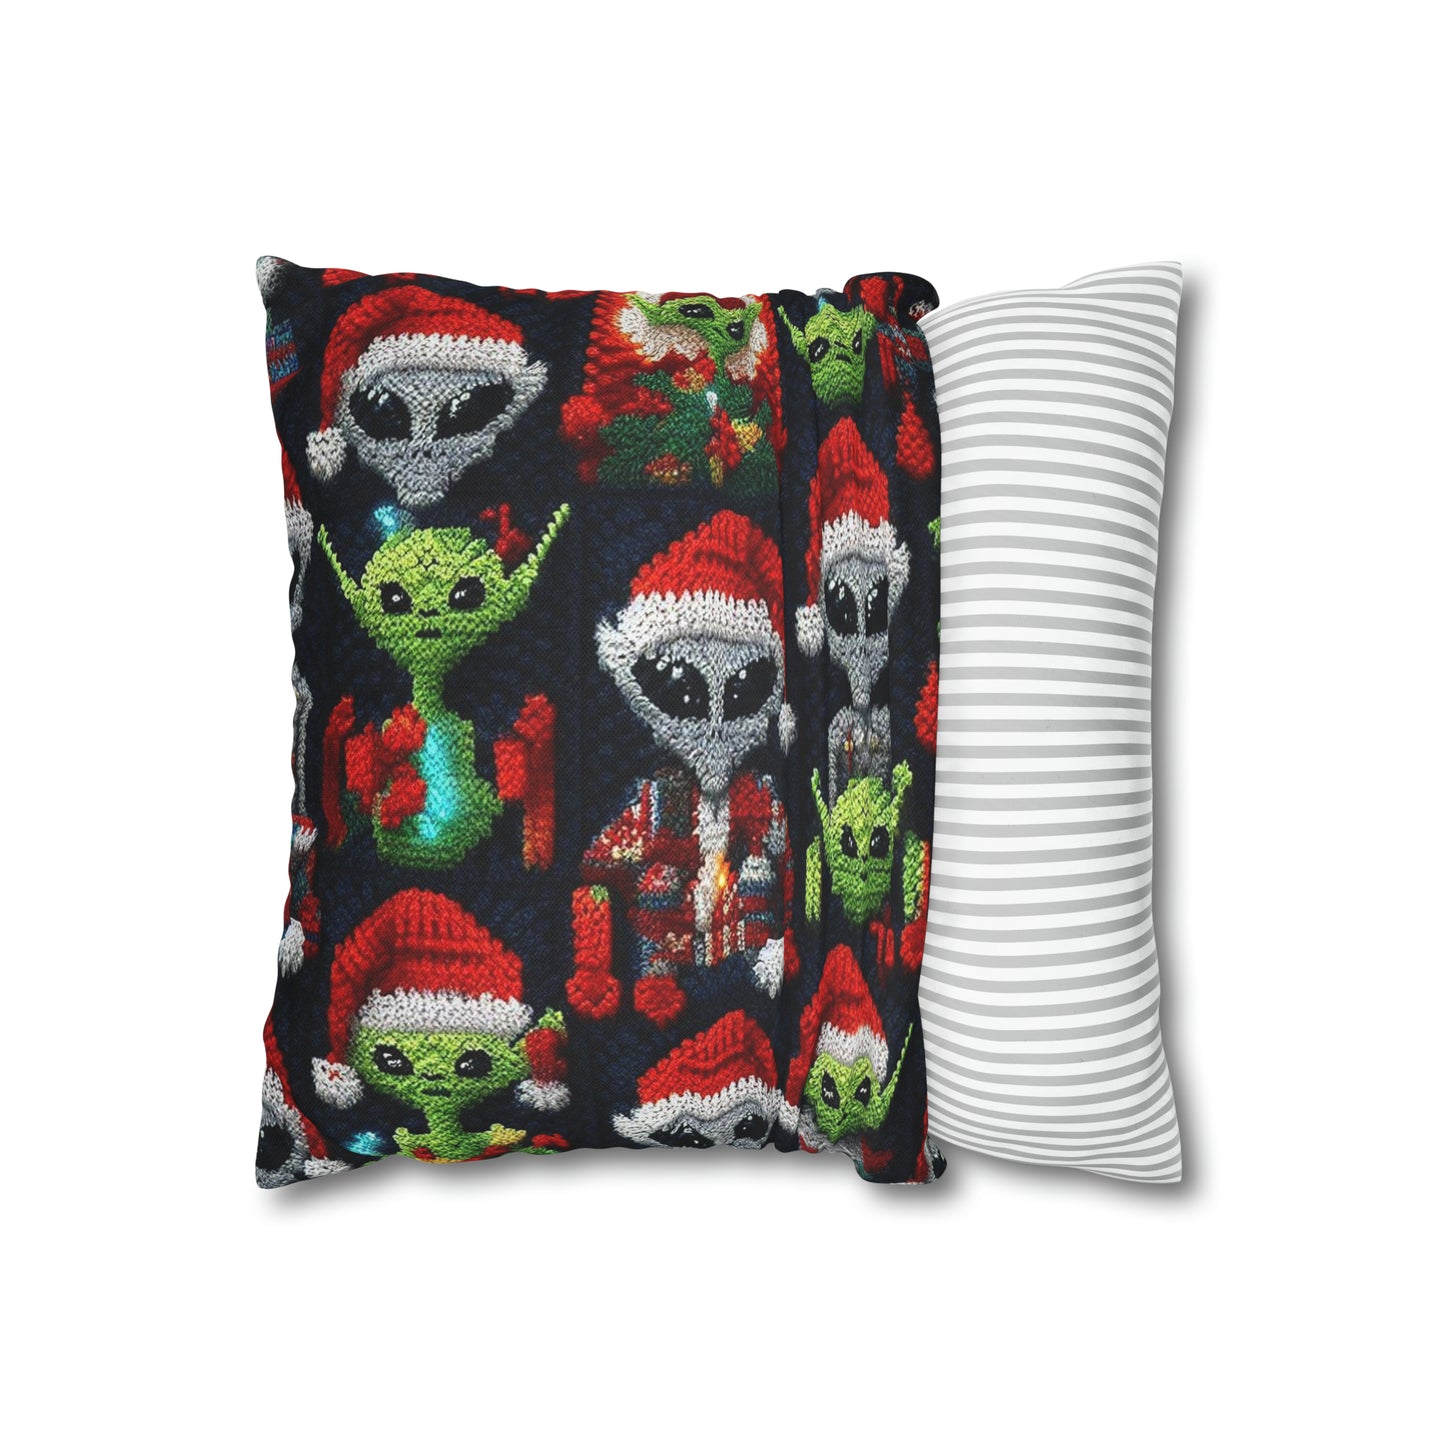 Festive Alien Invasion: Intergalactic Christmas Holiday Cheer with Santa Hats and Seasonal Gifts Crochet Pattern - Spun Polyester Square Pillow Case